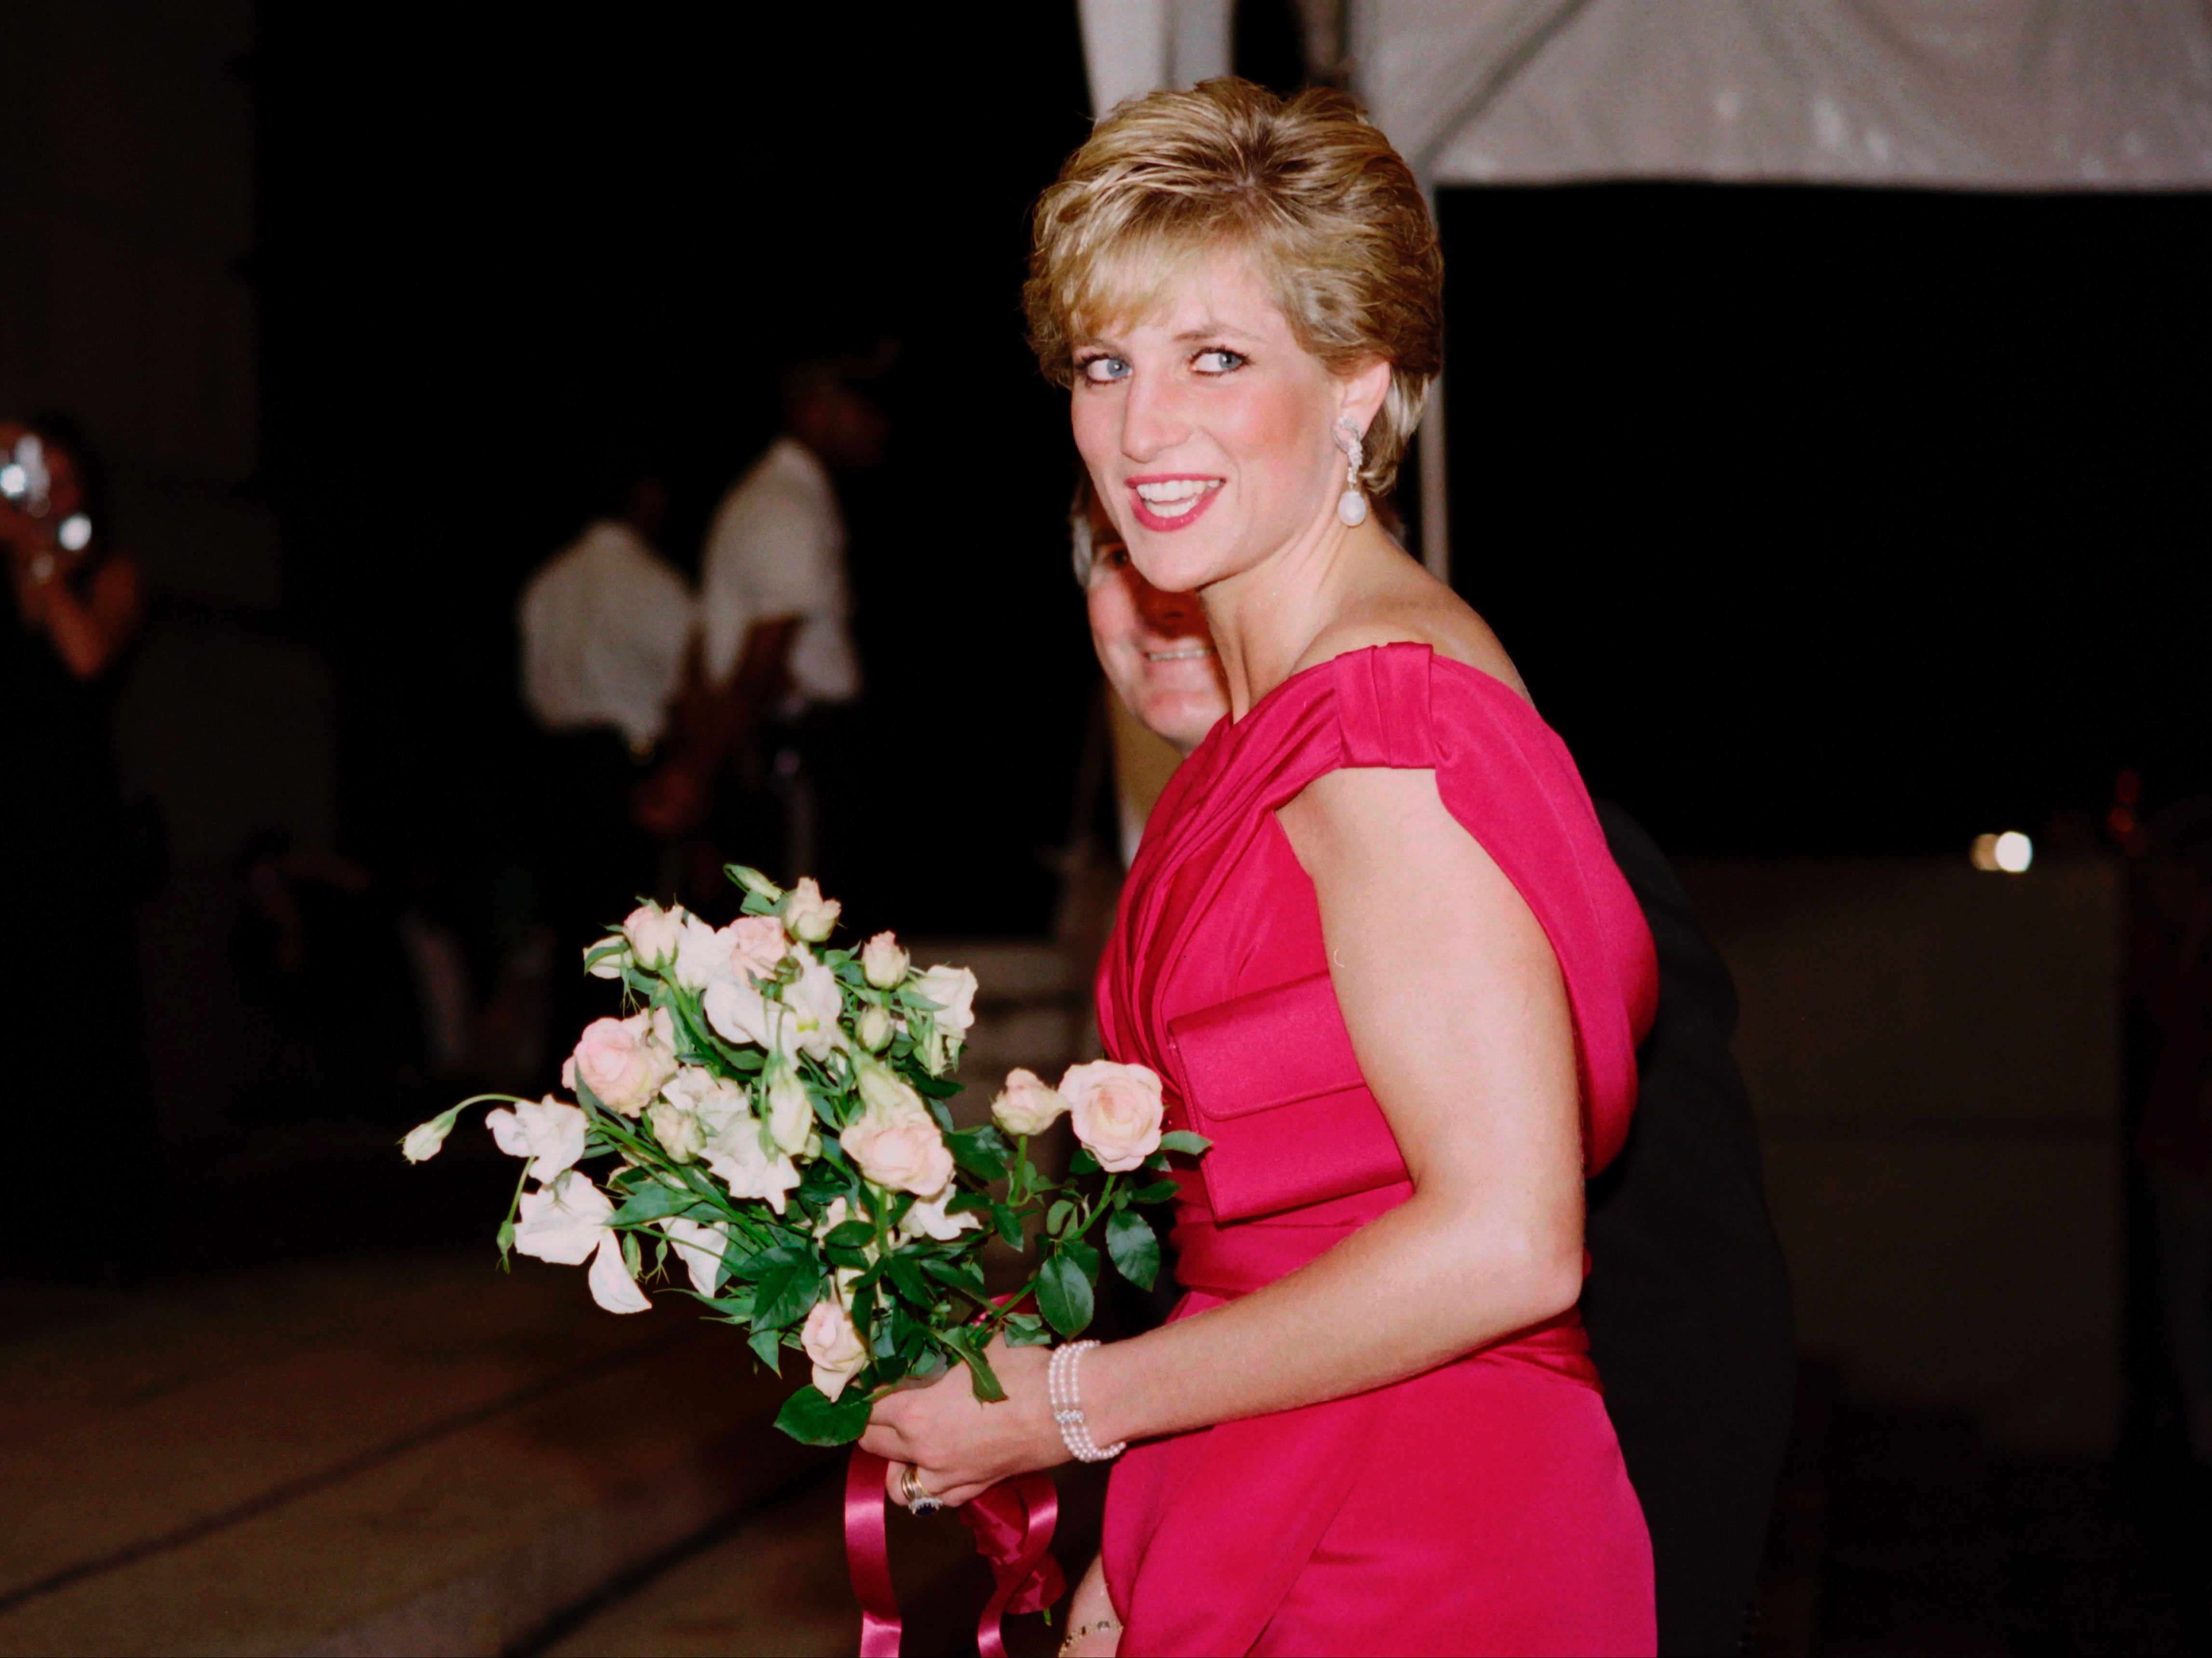 Important moments from the last years of Princess Diana’s life